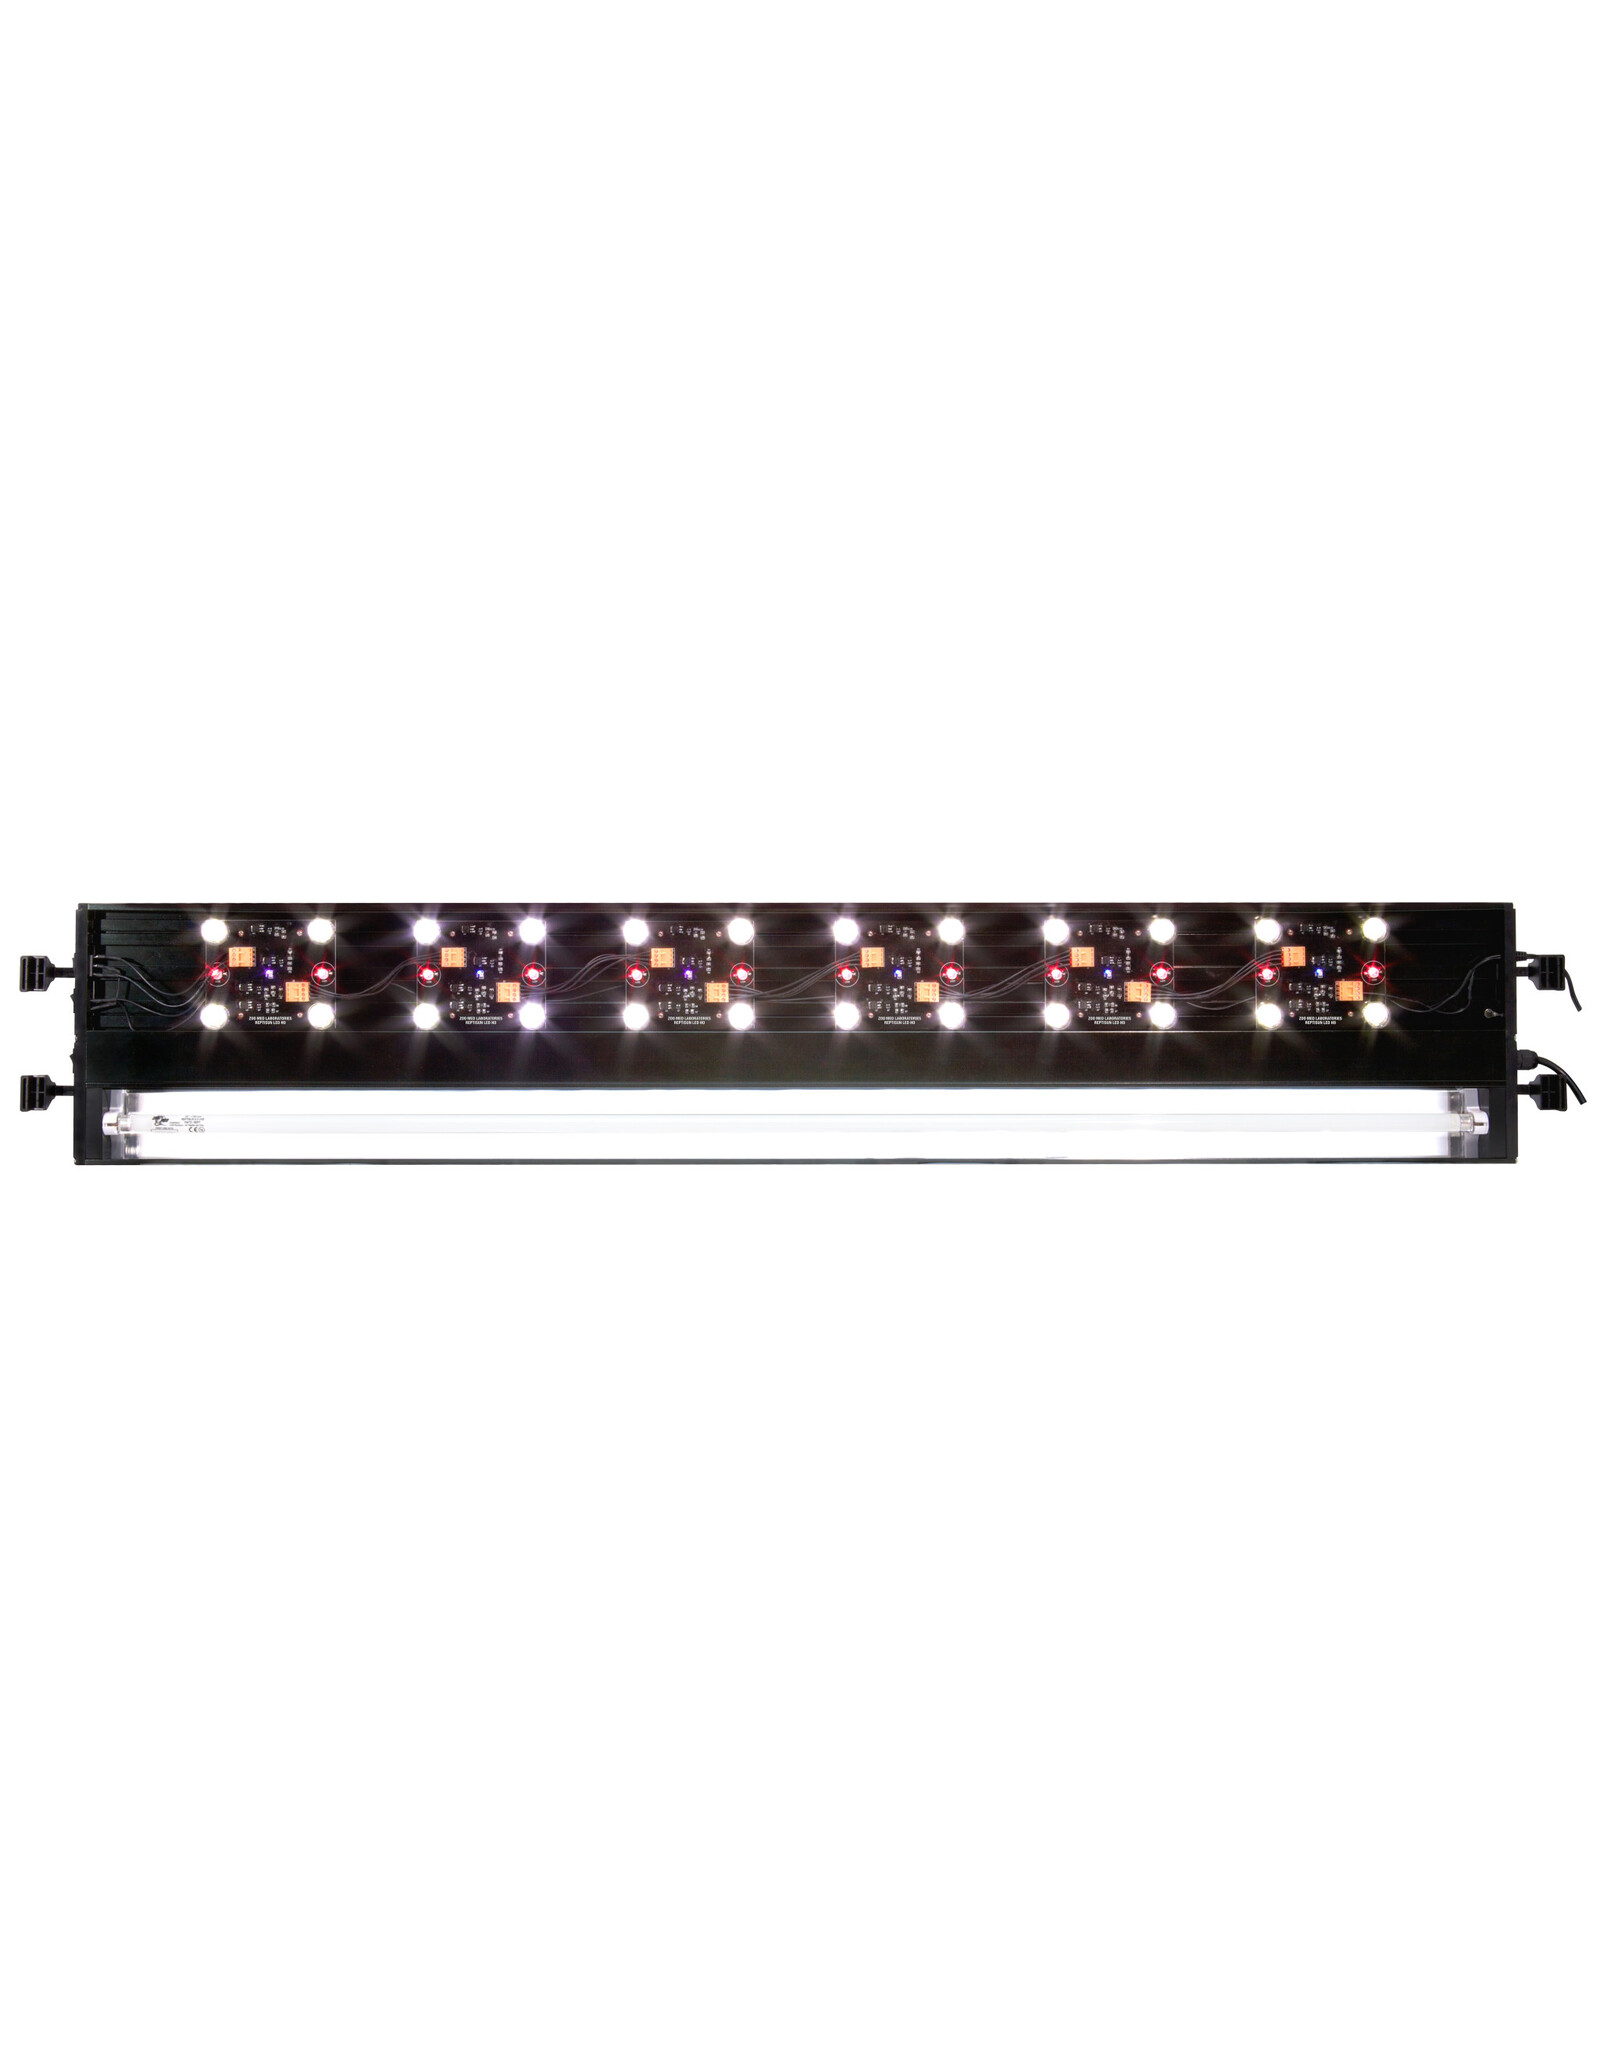 Zoo Med Zoo Med ReptiSun LED/UVB Fixture 48"